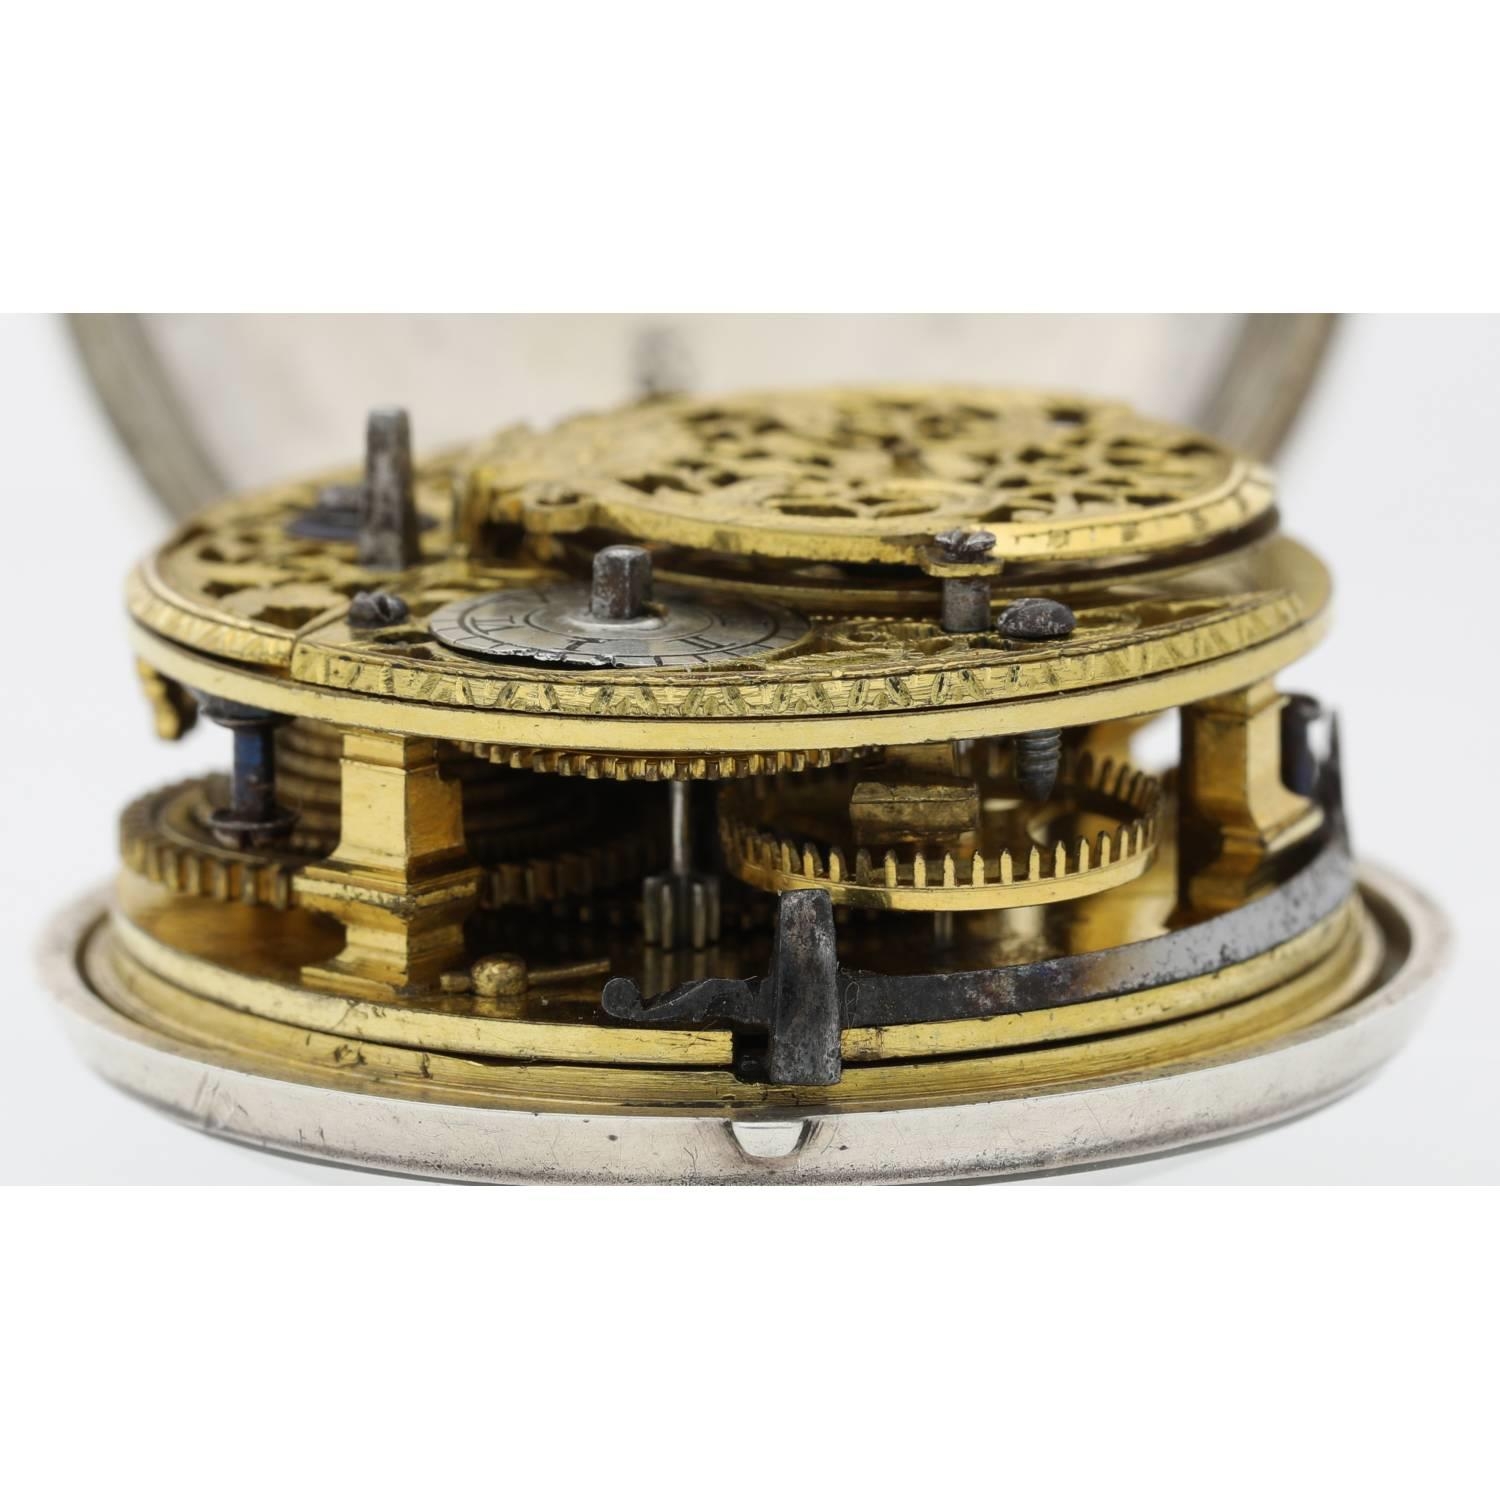 Samuel Weldon, London - English 18th century silver pair cased verge pocket watch, signed fusee - Image 6 of 11